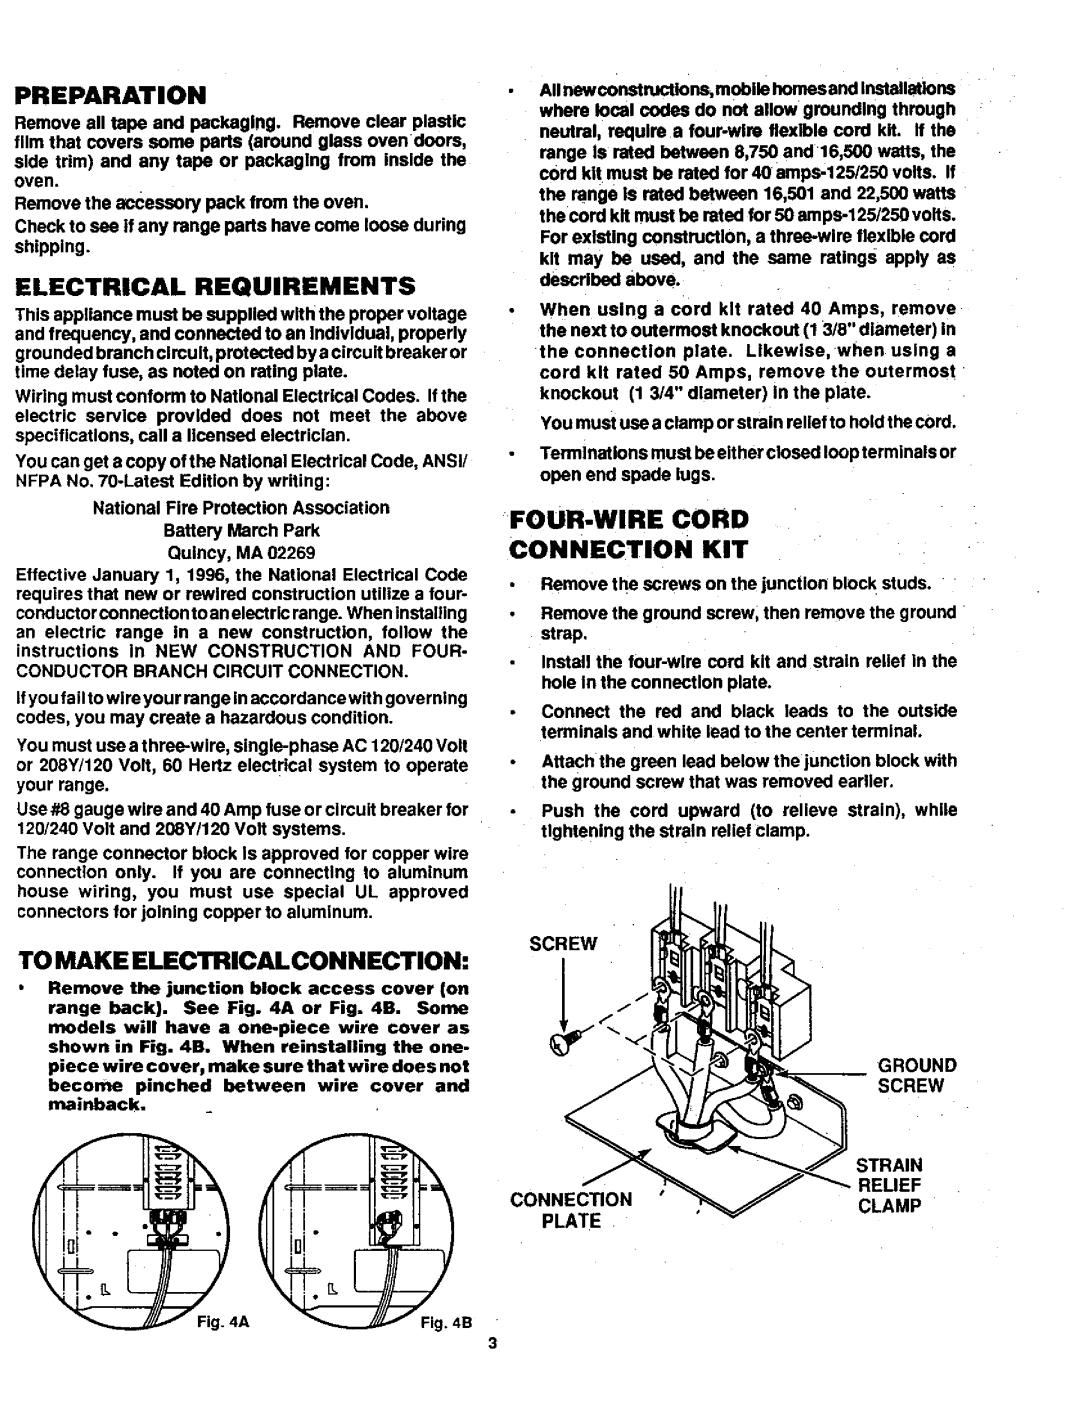 Sears SR10095 Preparation, Electrical Requirements, To Make Electricalconnection, Four-Wirecord Connection Kit 